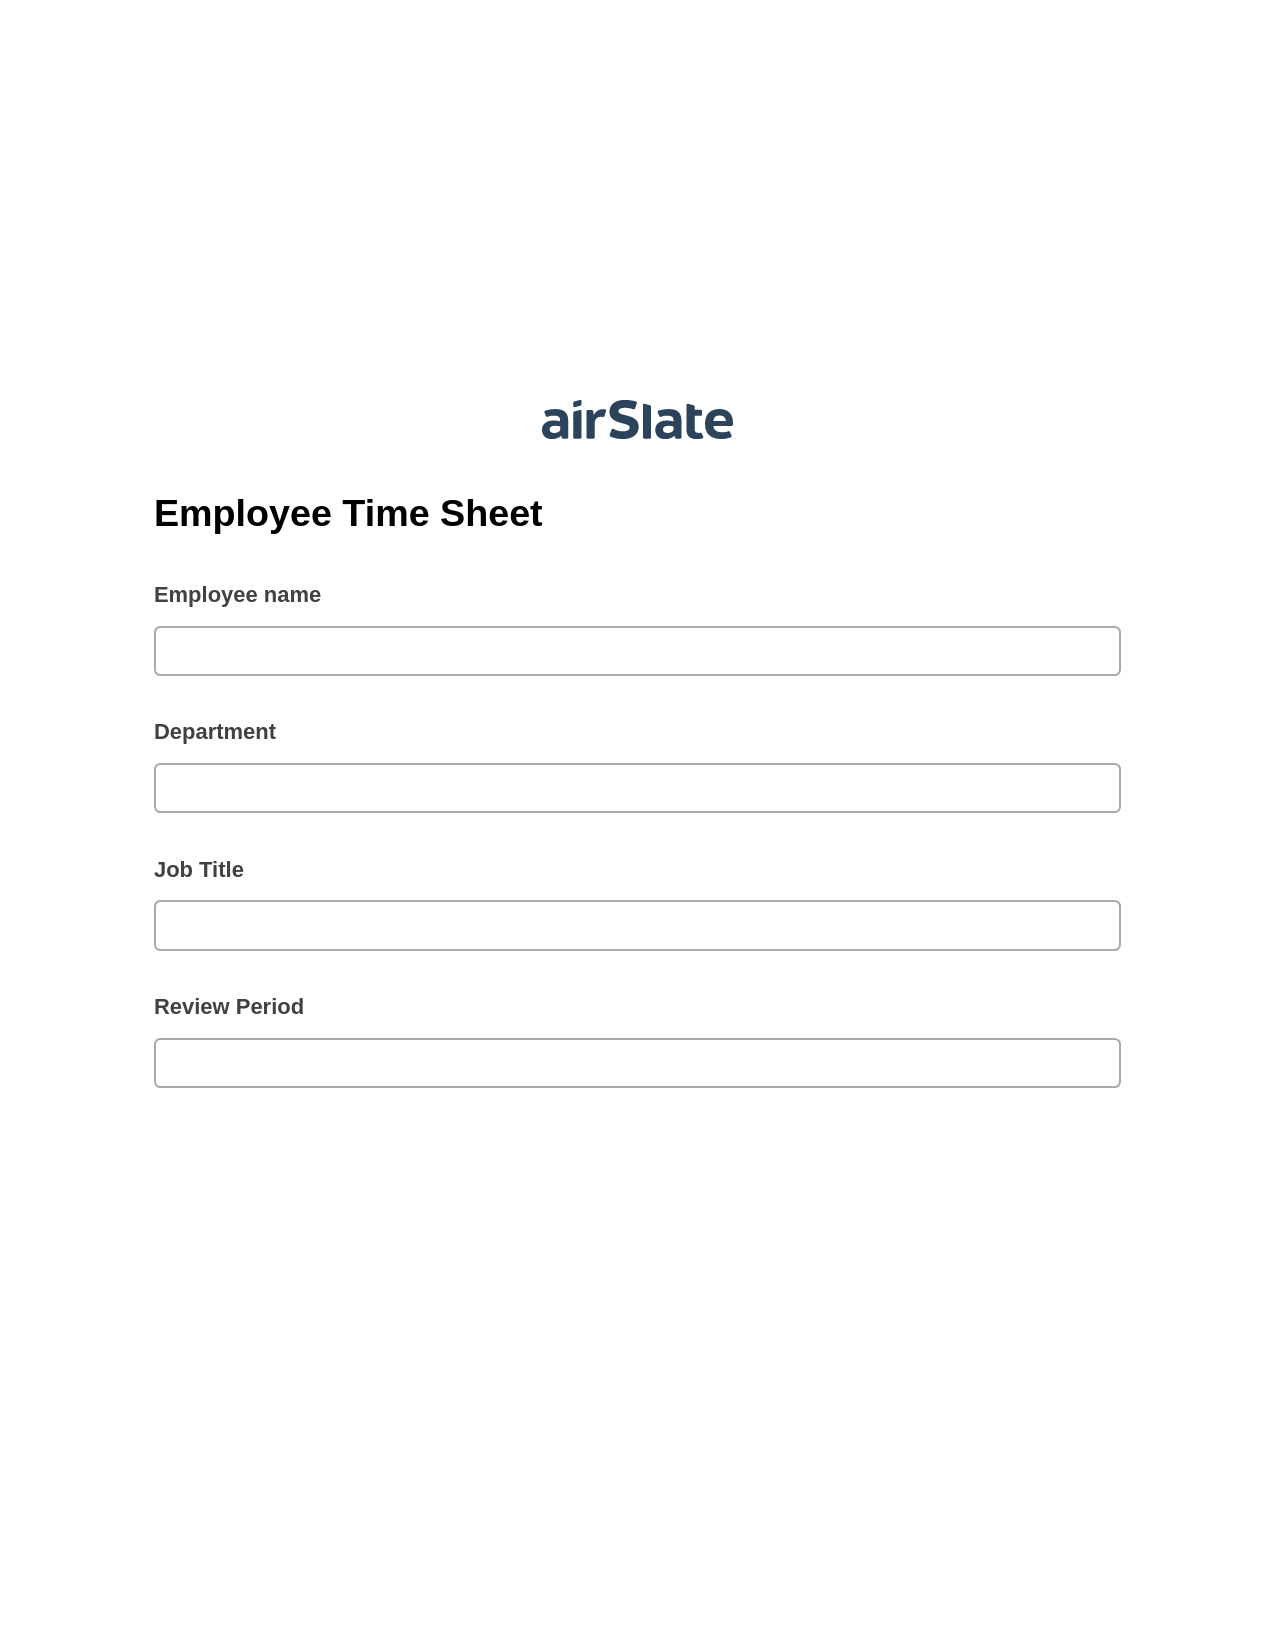 Multirole Employee Time Sheet Pre-fill from Office 365 Excel Bot, Hide Signatures Bot, Export to Smartsheet